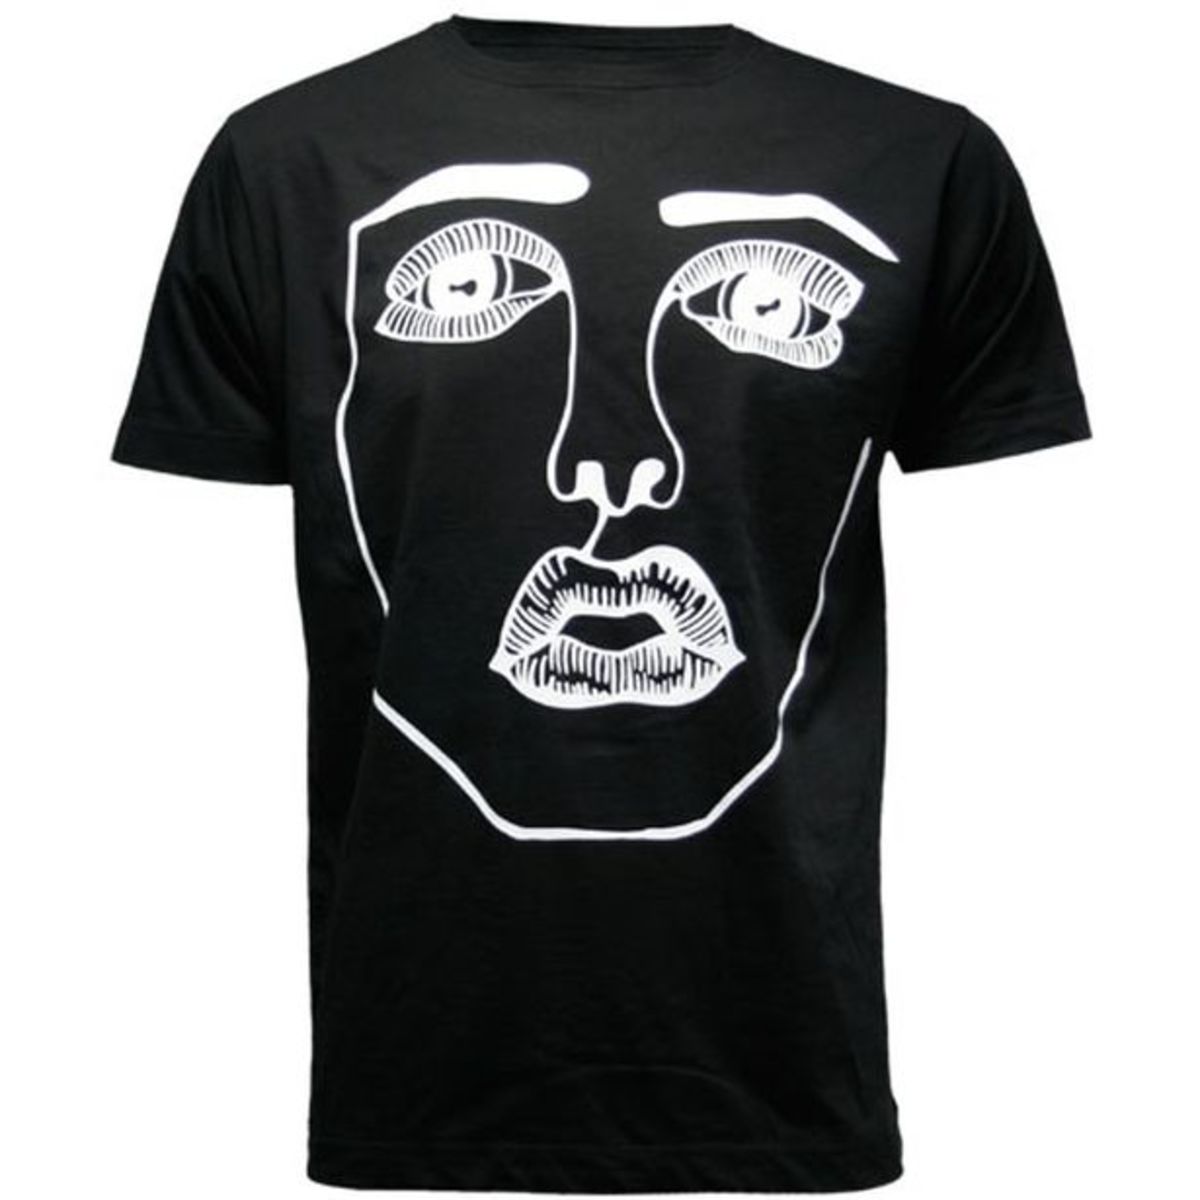 EDM Style: Disclosure Releases Limited Edition T-Shirt Featuring Album Art